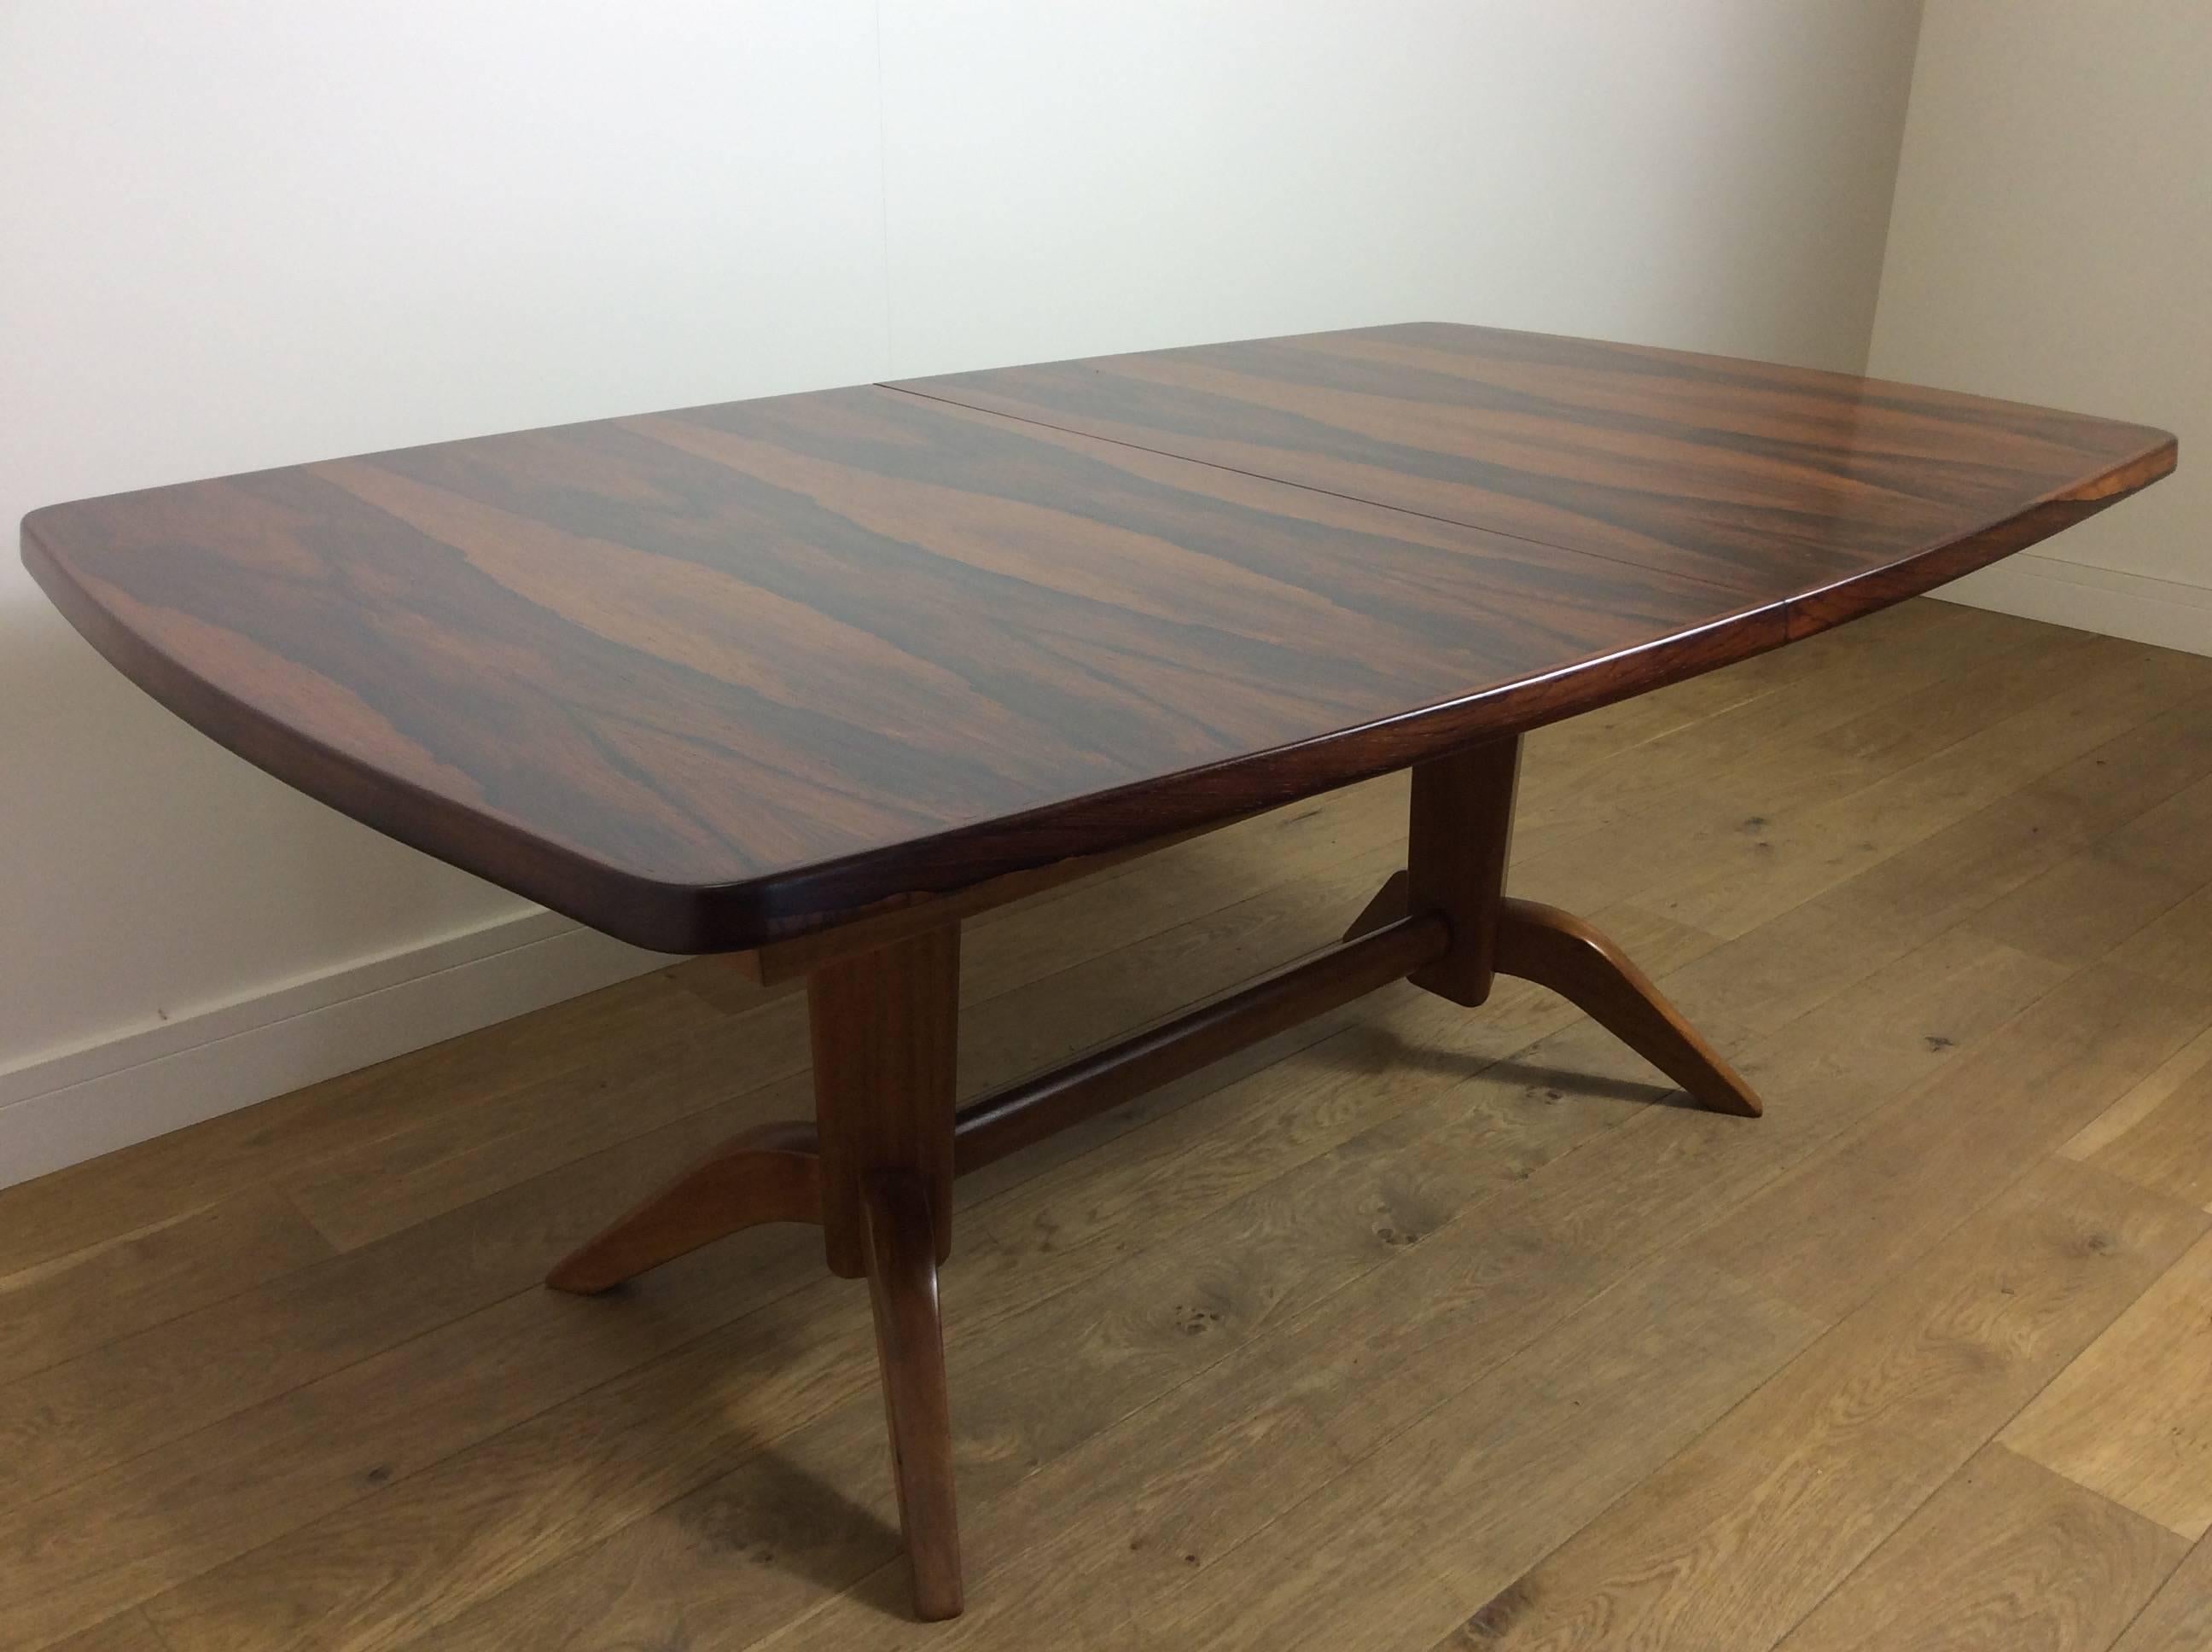 Midcentury table in a stunning Rio rosewood.
Mid-Century Modern design at its best with this beautiful extendable rosewood table, the extension leaf stores away neatly inside the table.
Danish, circa 1960
Measures: 71 cm H, 177 cm W, 105.5 cm D